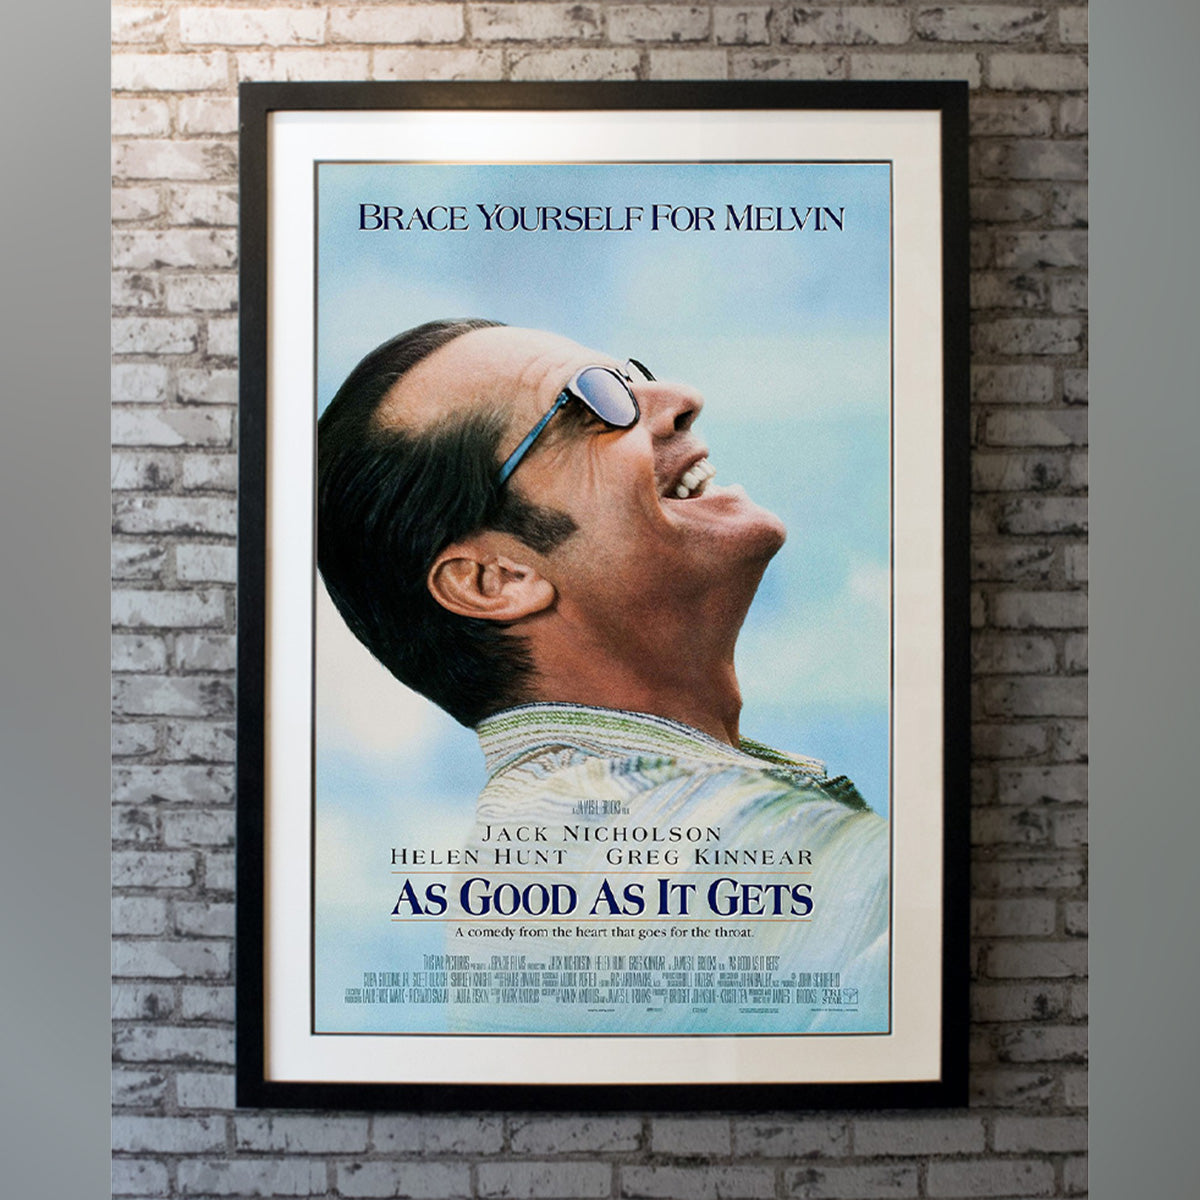 Original Movie Poster of As Good As It Gets (1997)